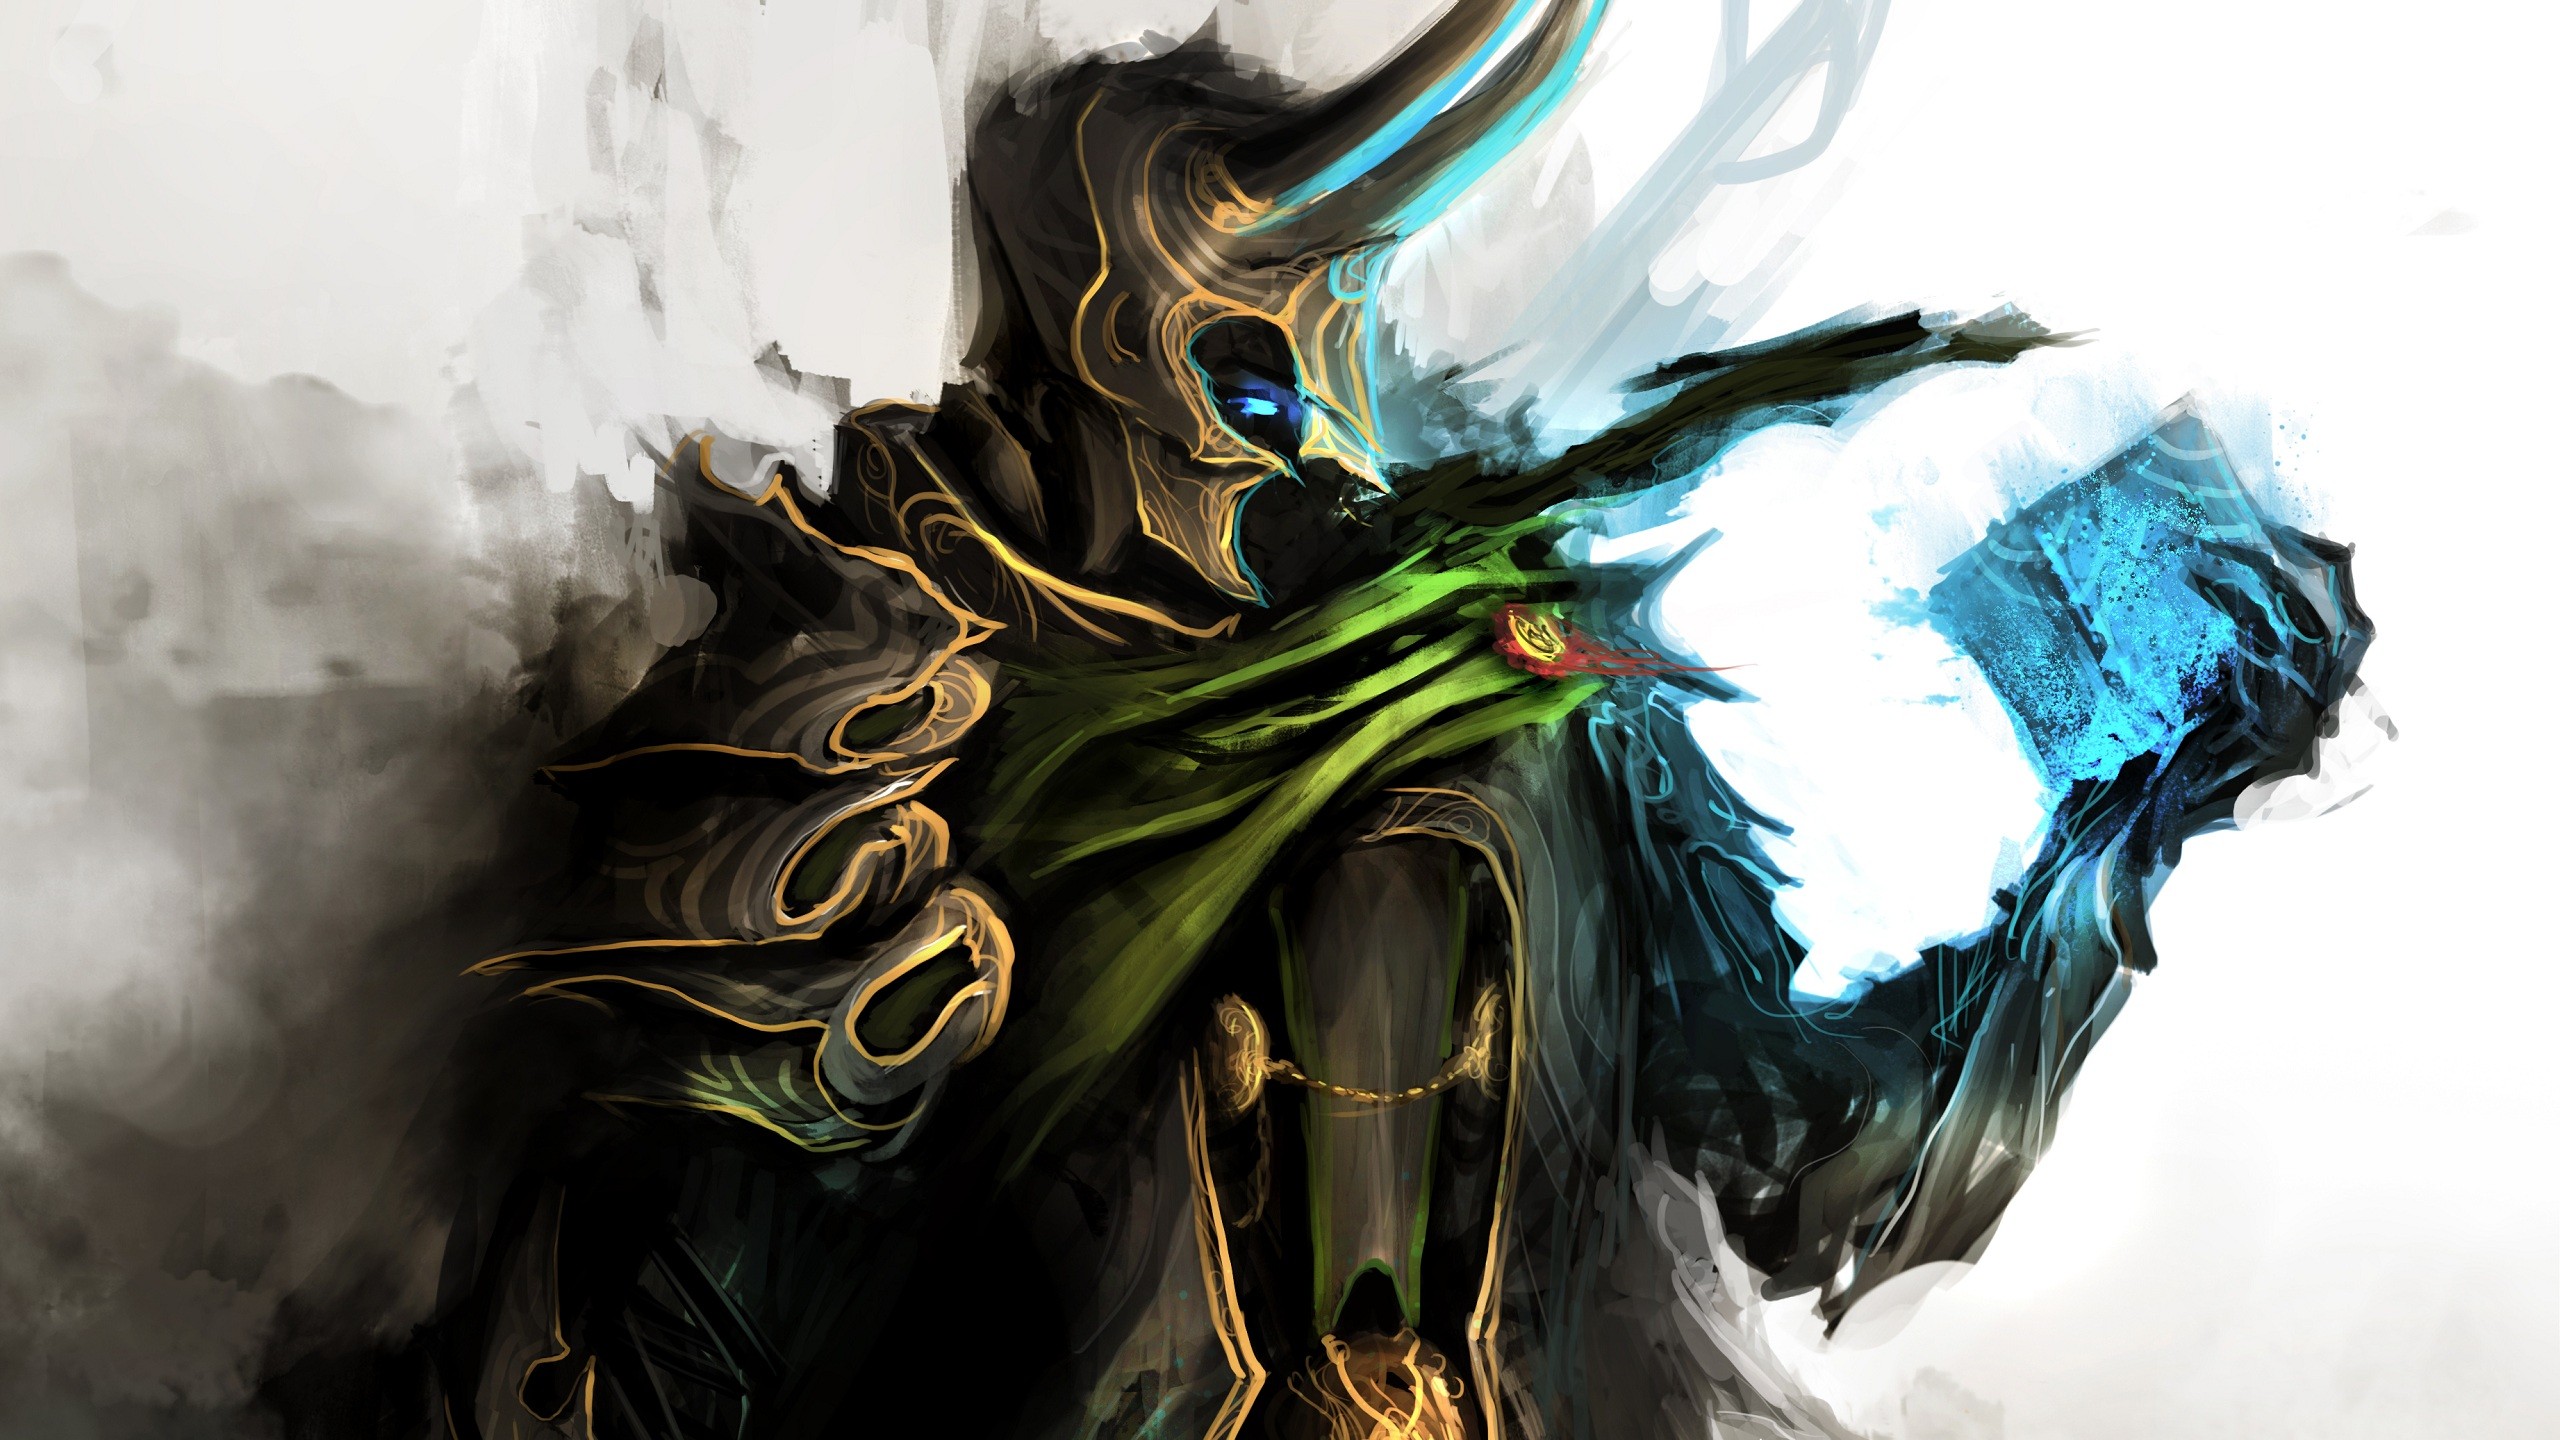 170+ Loki (Marvel Comics) HD Wallpapers and Backgrounds